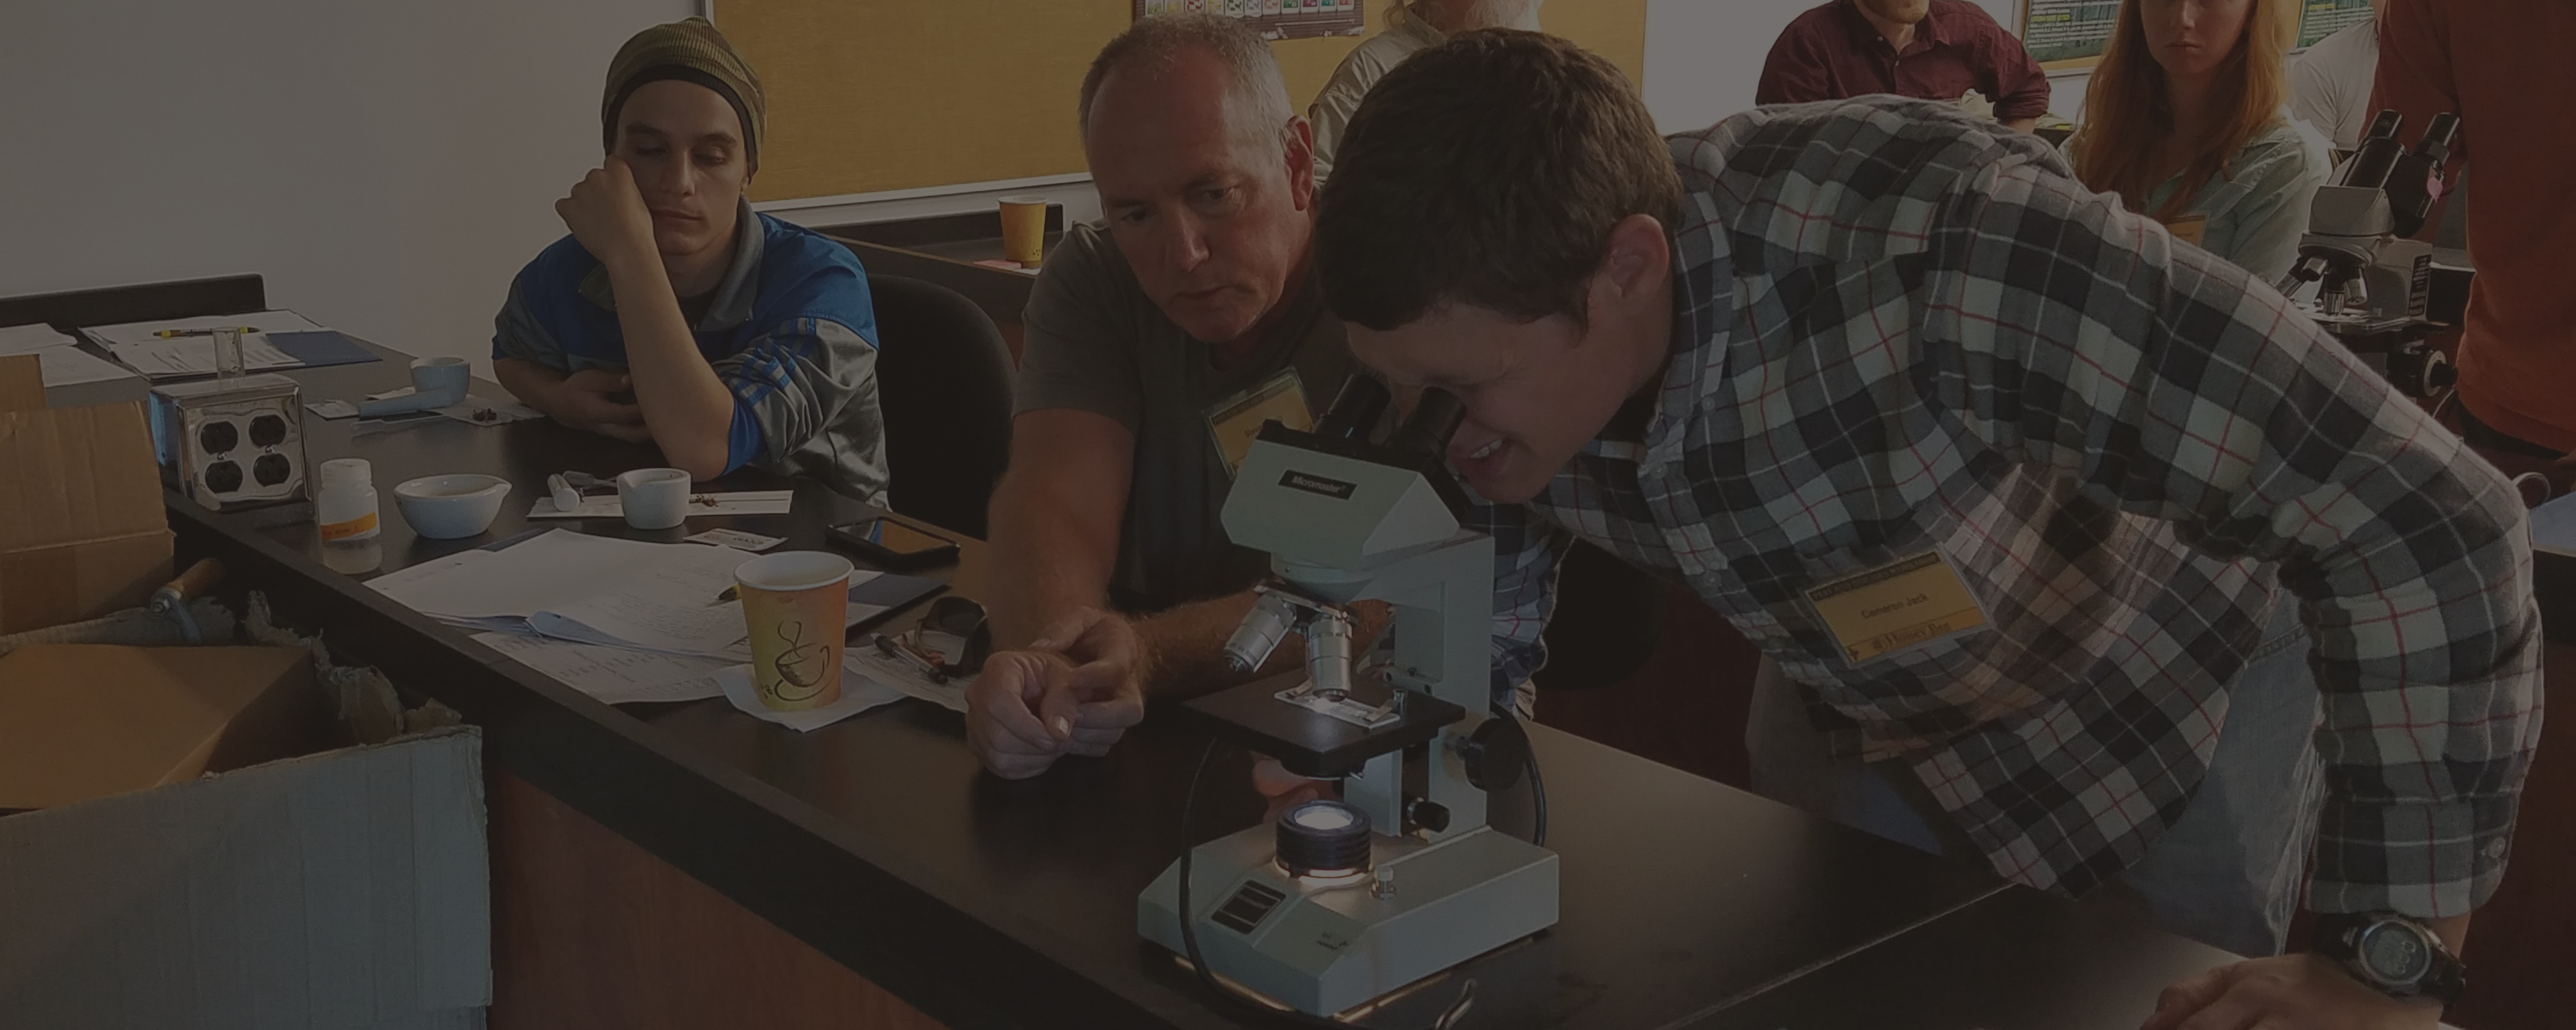 Students looking through a microscope